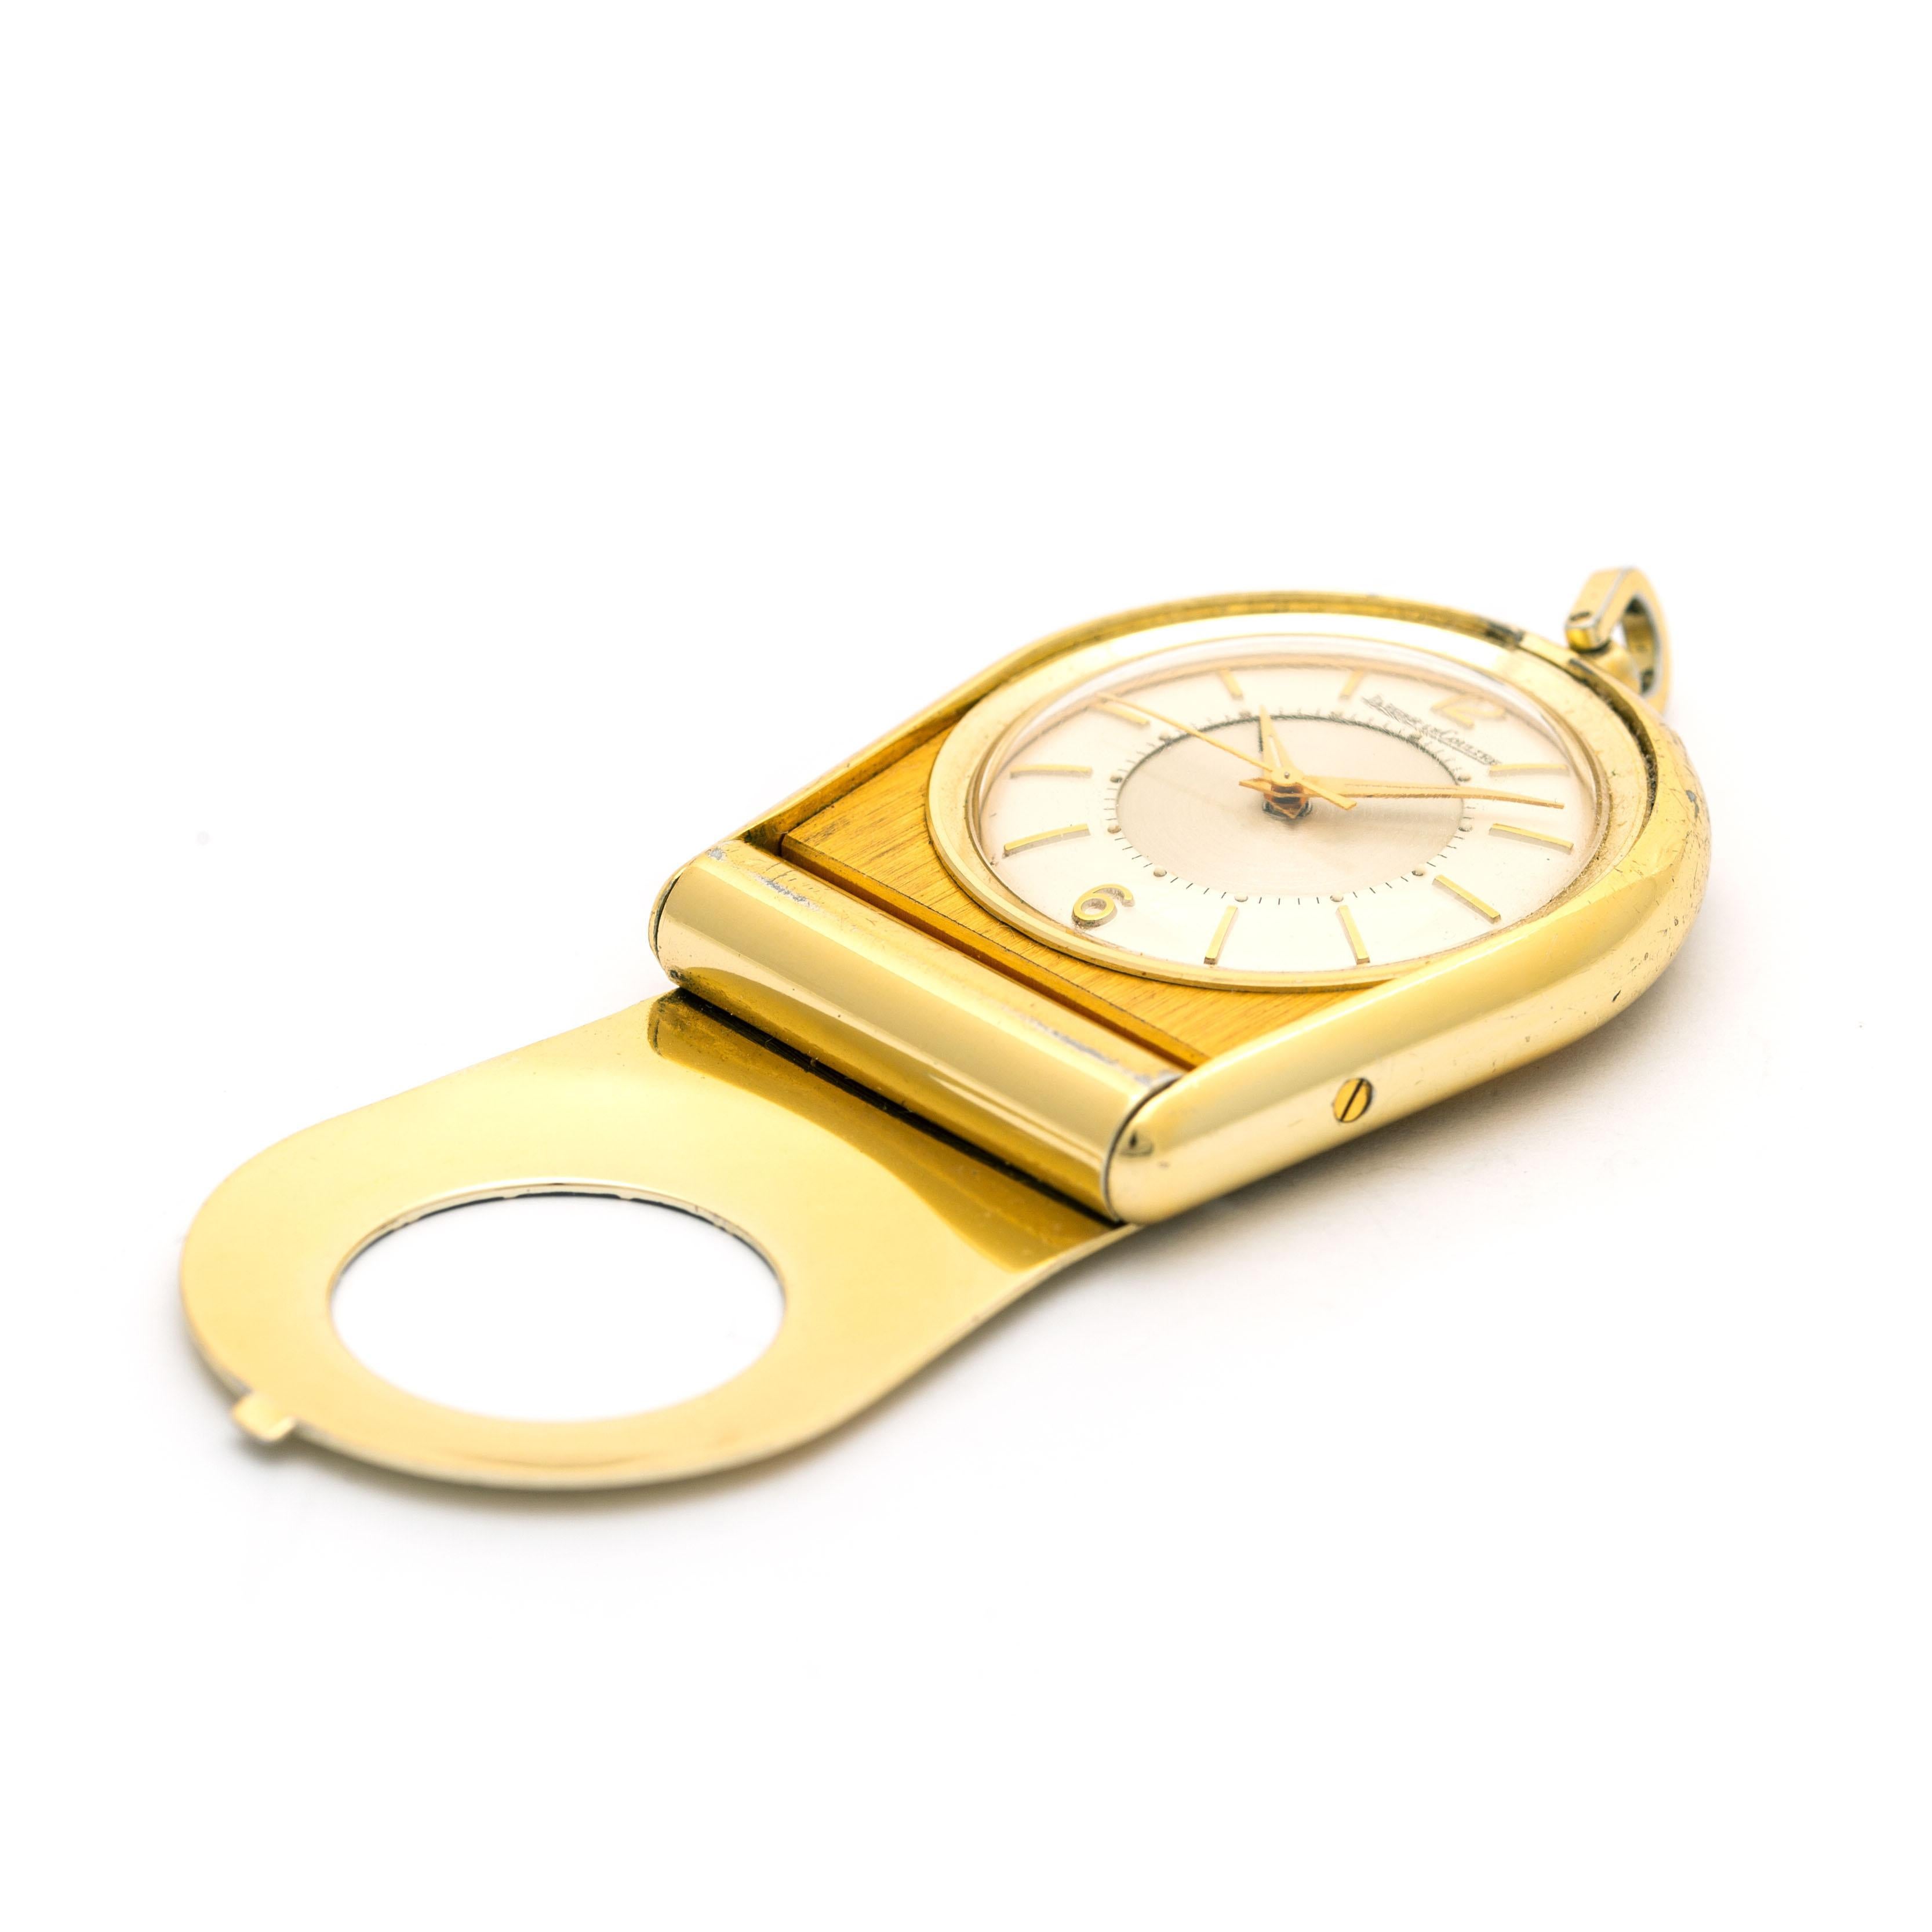 Jaeger-LeCoultre. Gold-Plated Metal Pocket Watch For Sale 1